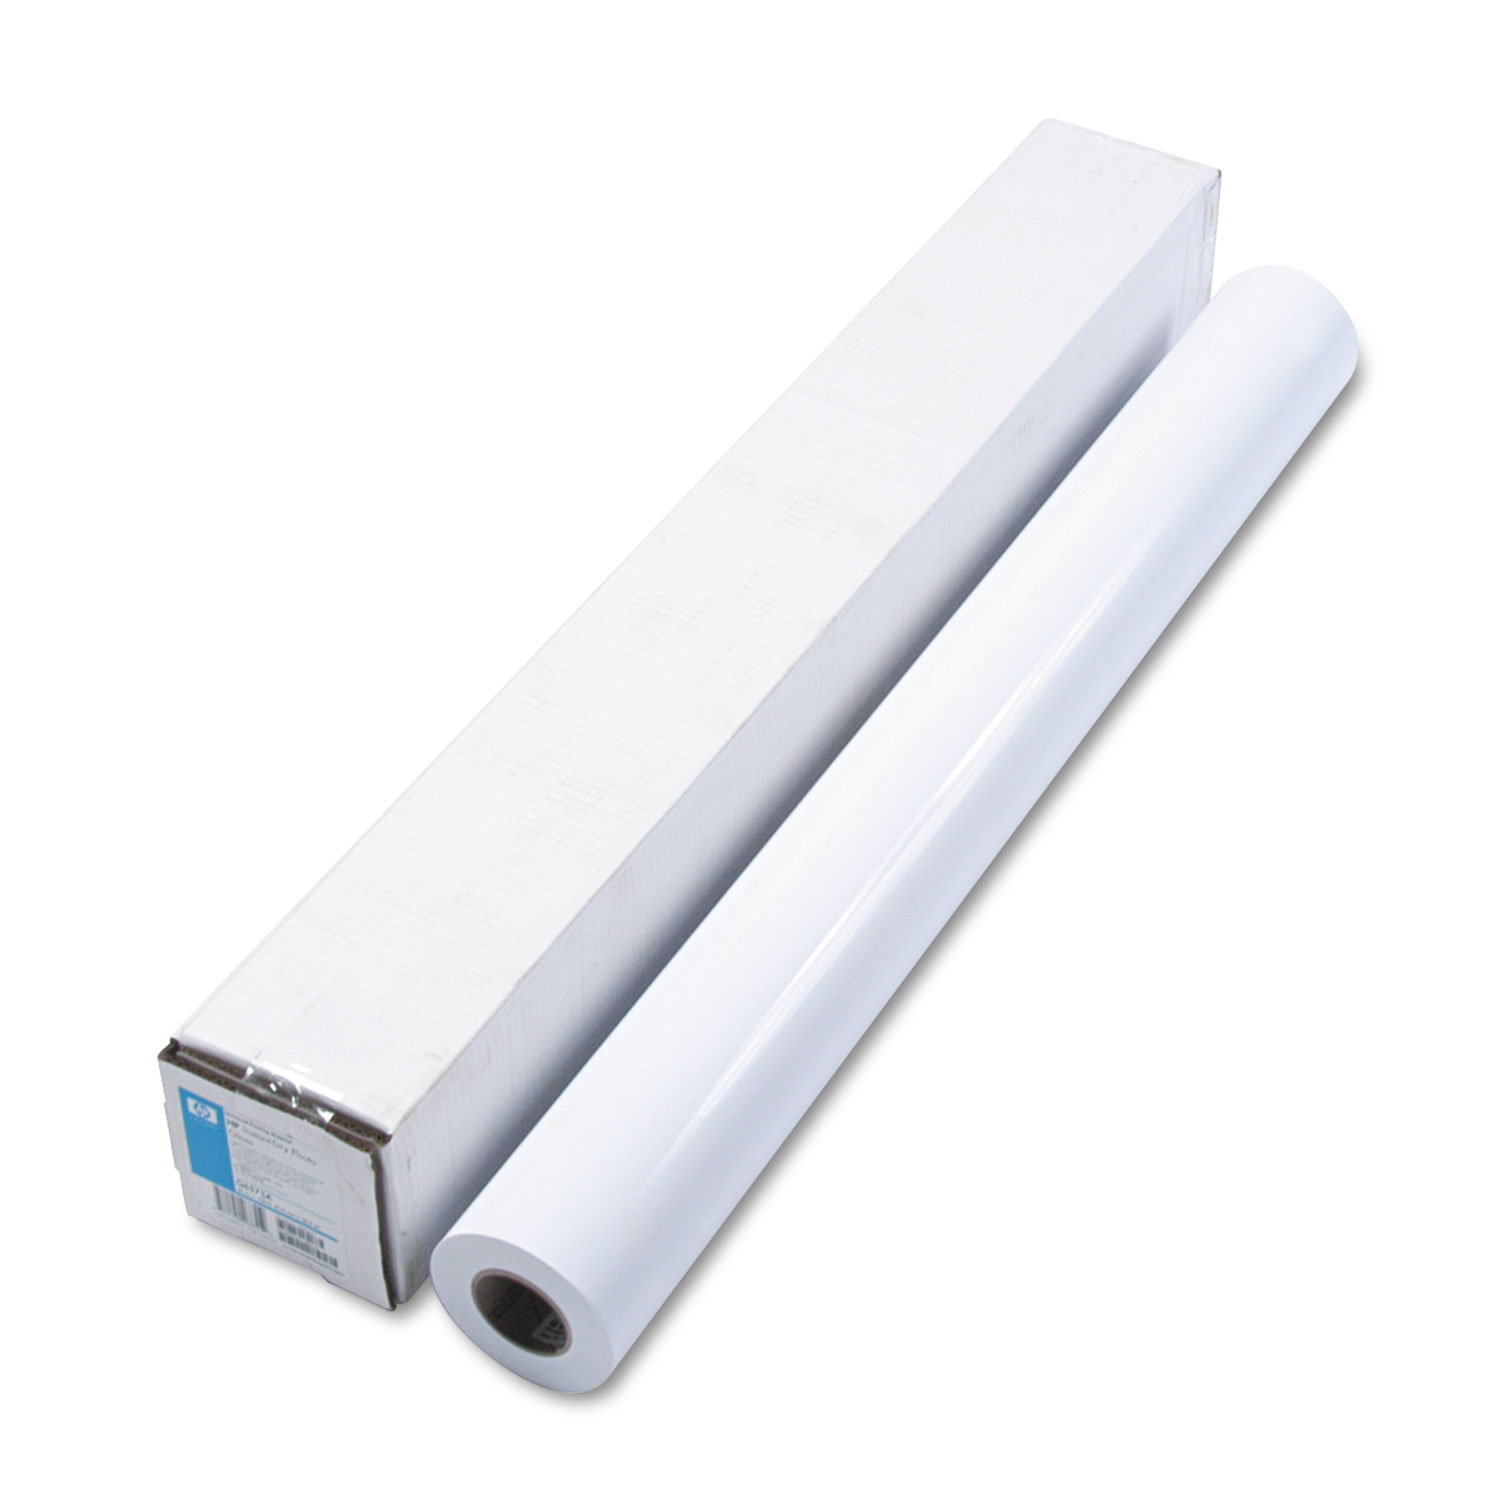  HP Q6575A DesignJet Large Format Paper for Inkjet Prints, 7 mil, 36 x 100 ft, Gloss White (HEWQ6575A) 